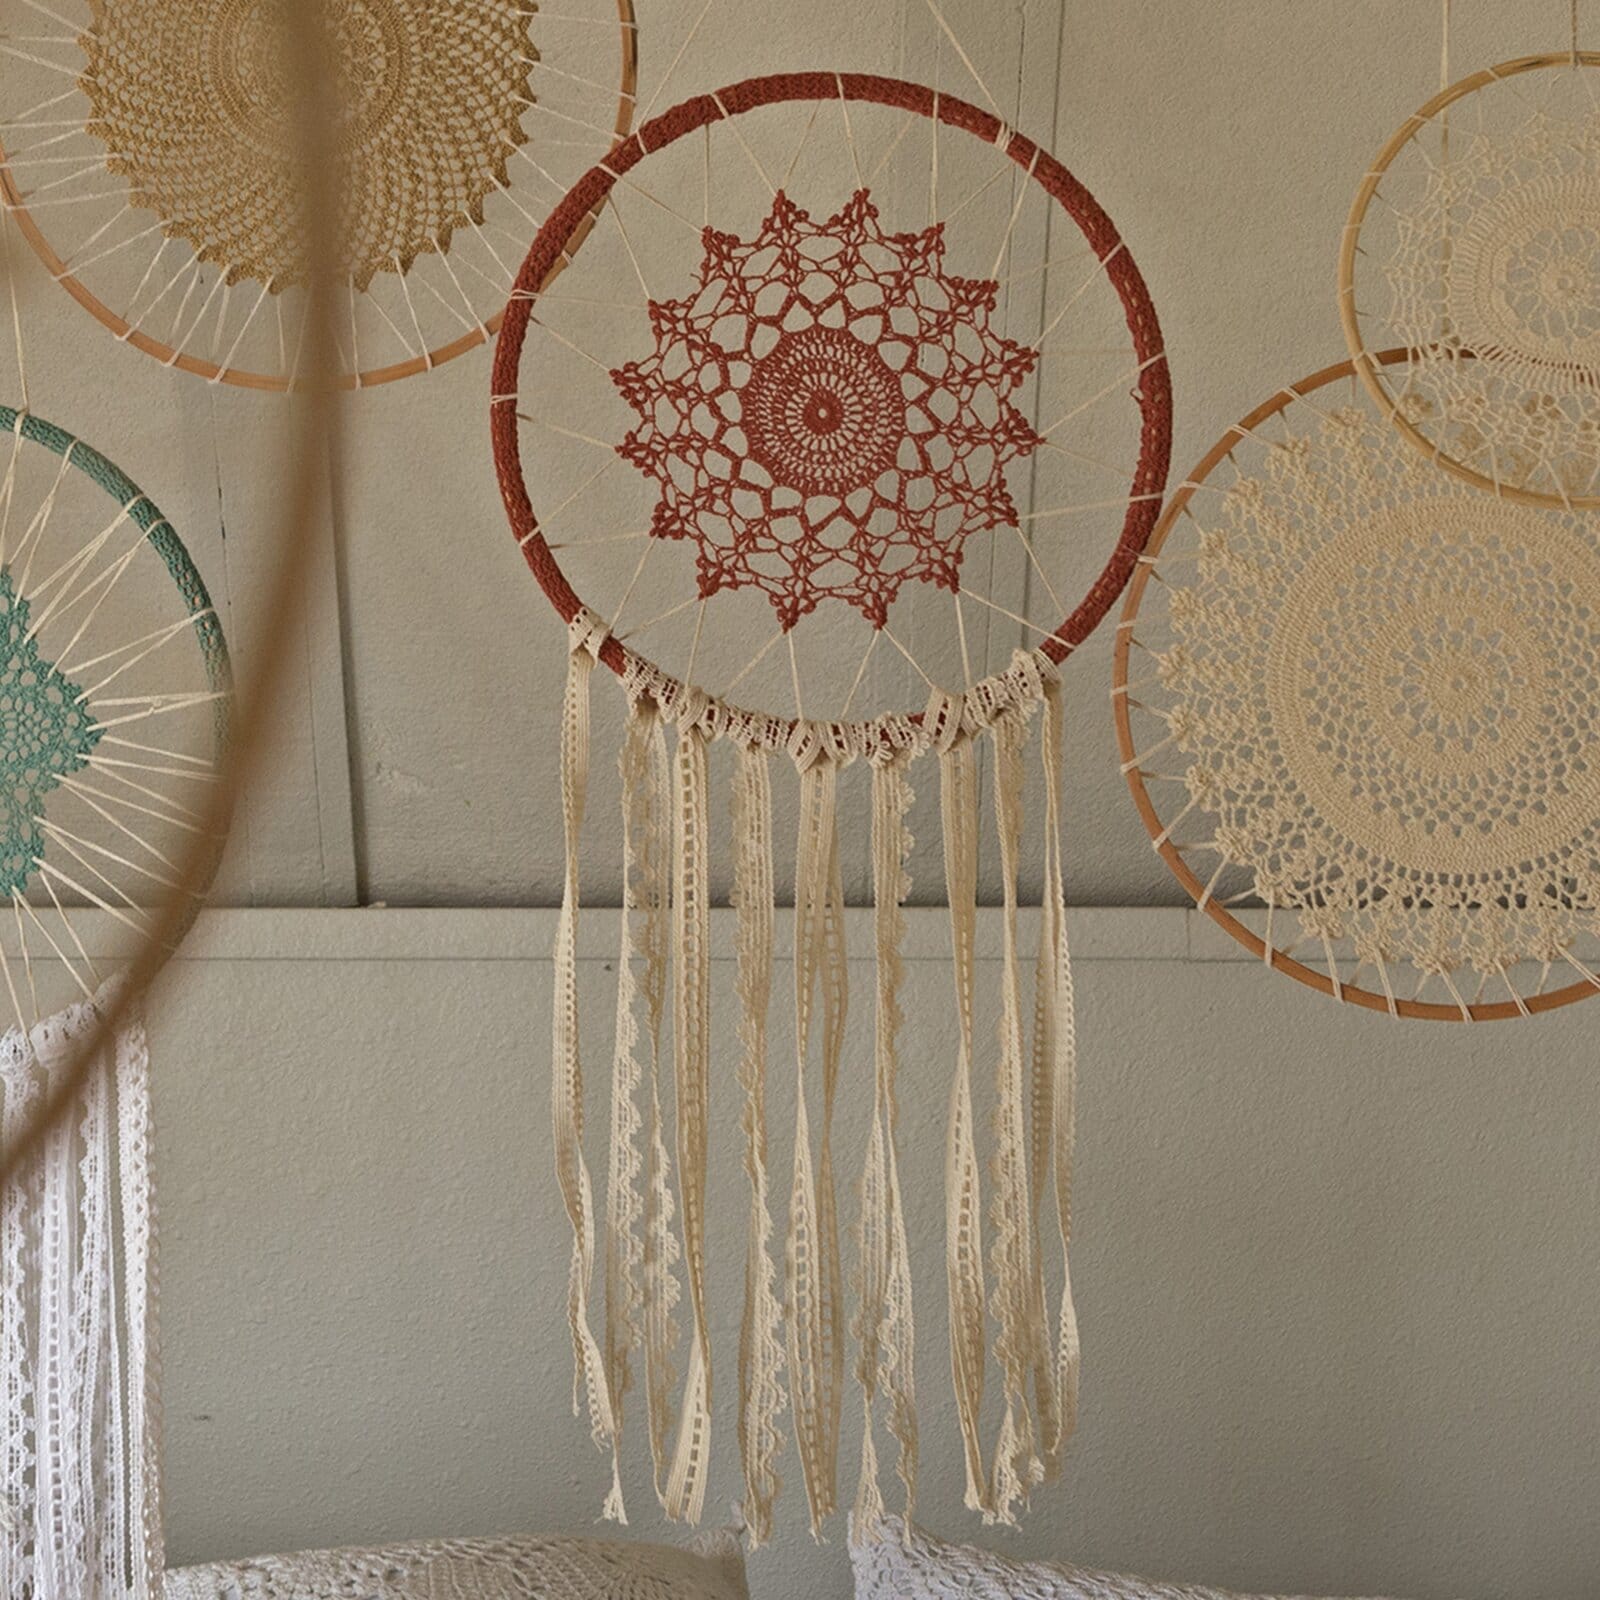 Bring In a Dreamcatcher for Boho Authenticity